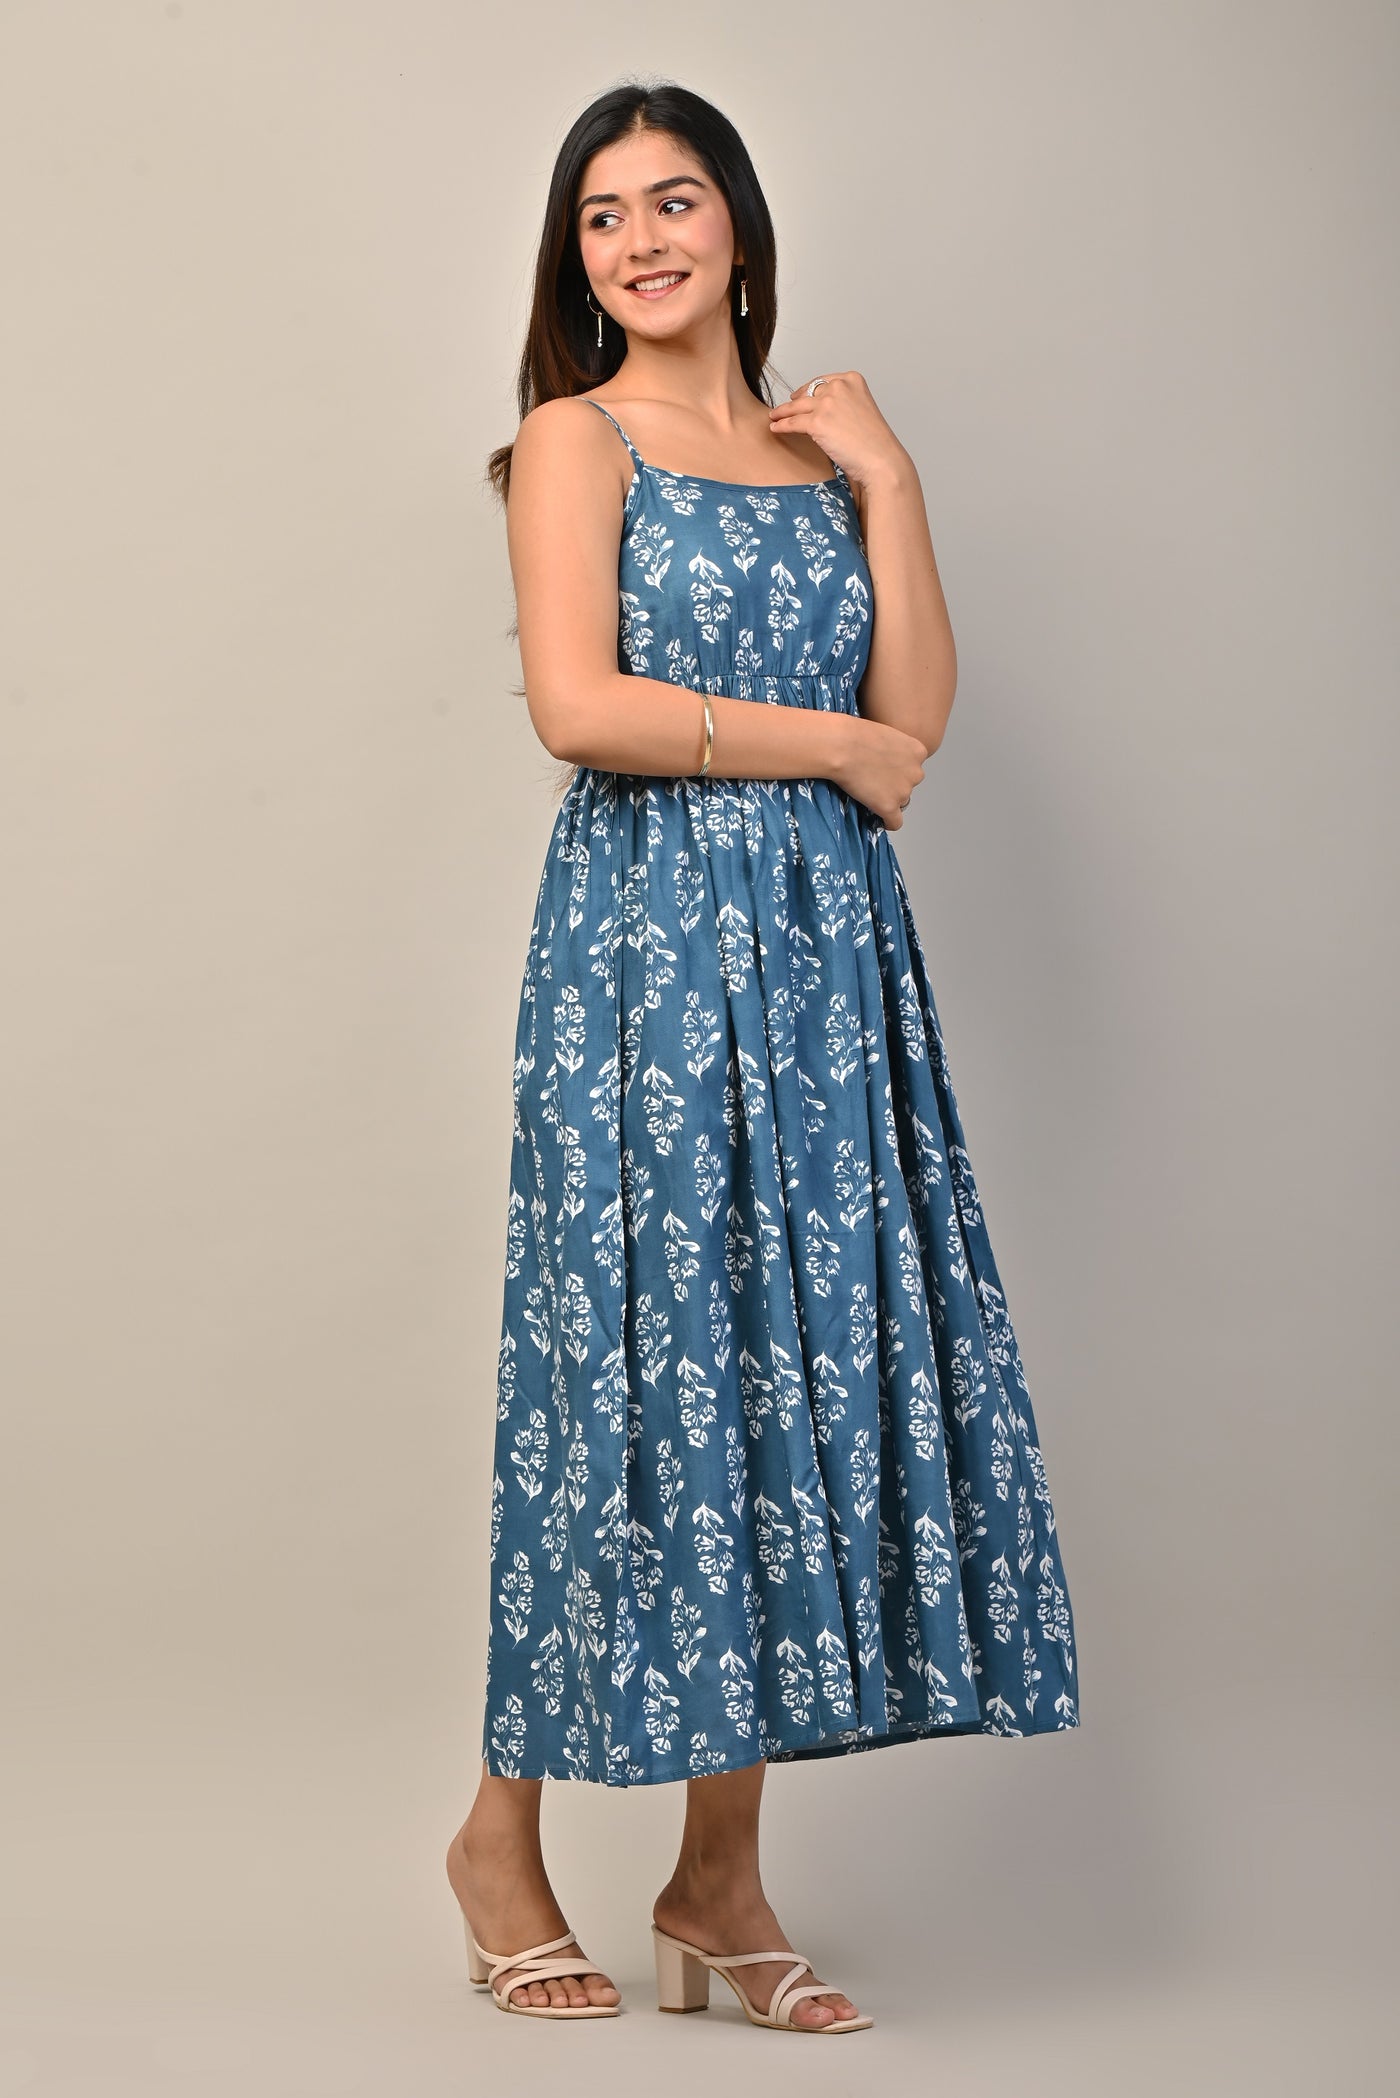 Sky Blue and White Ethnic Floral Print Midi Dress